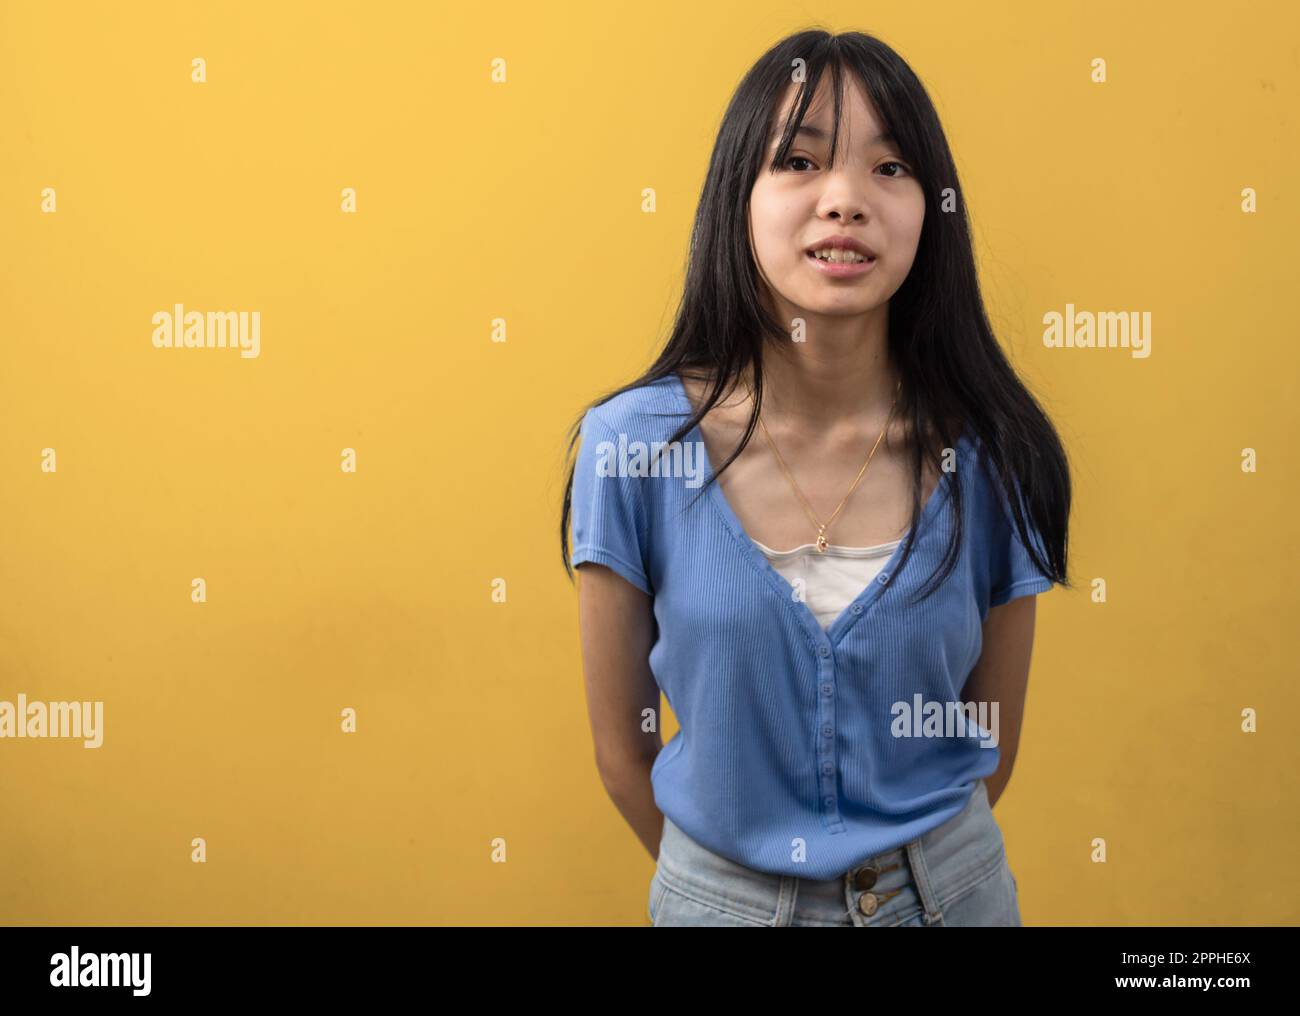 asian girl smiling. lifestyle beauty and fashion on yellow background.copy space. Stock Photo